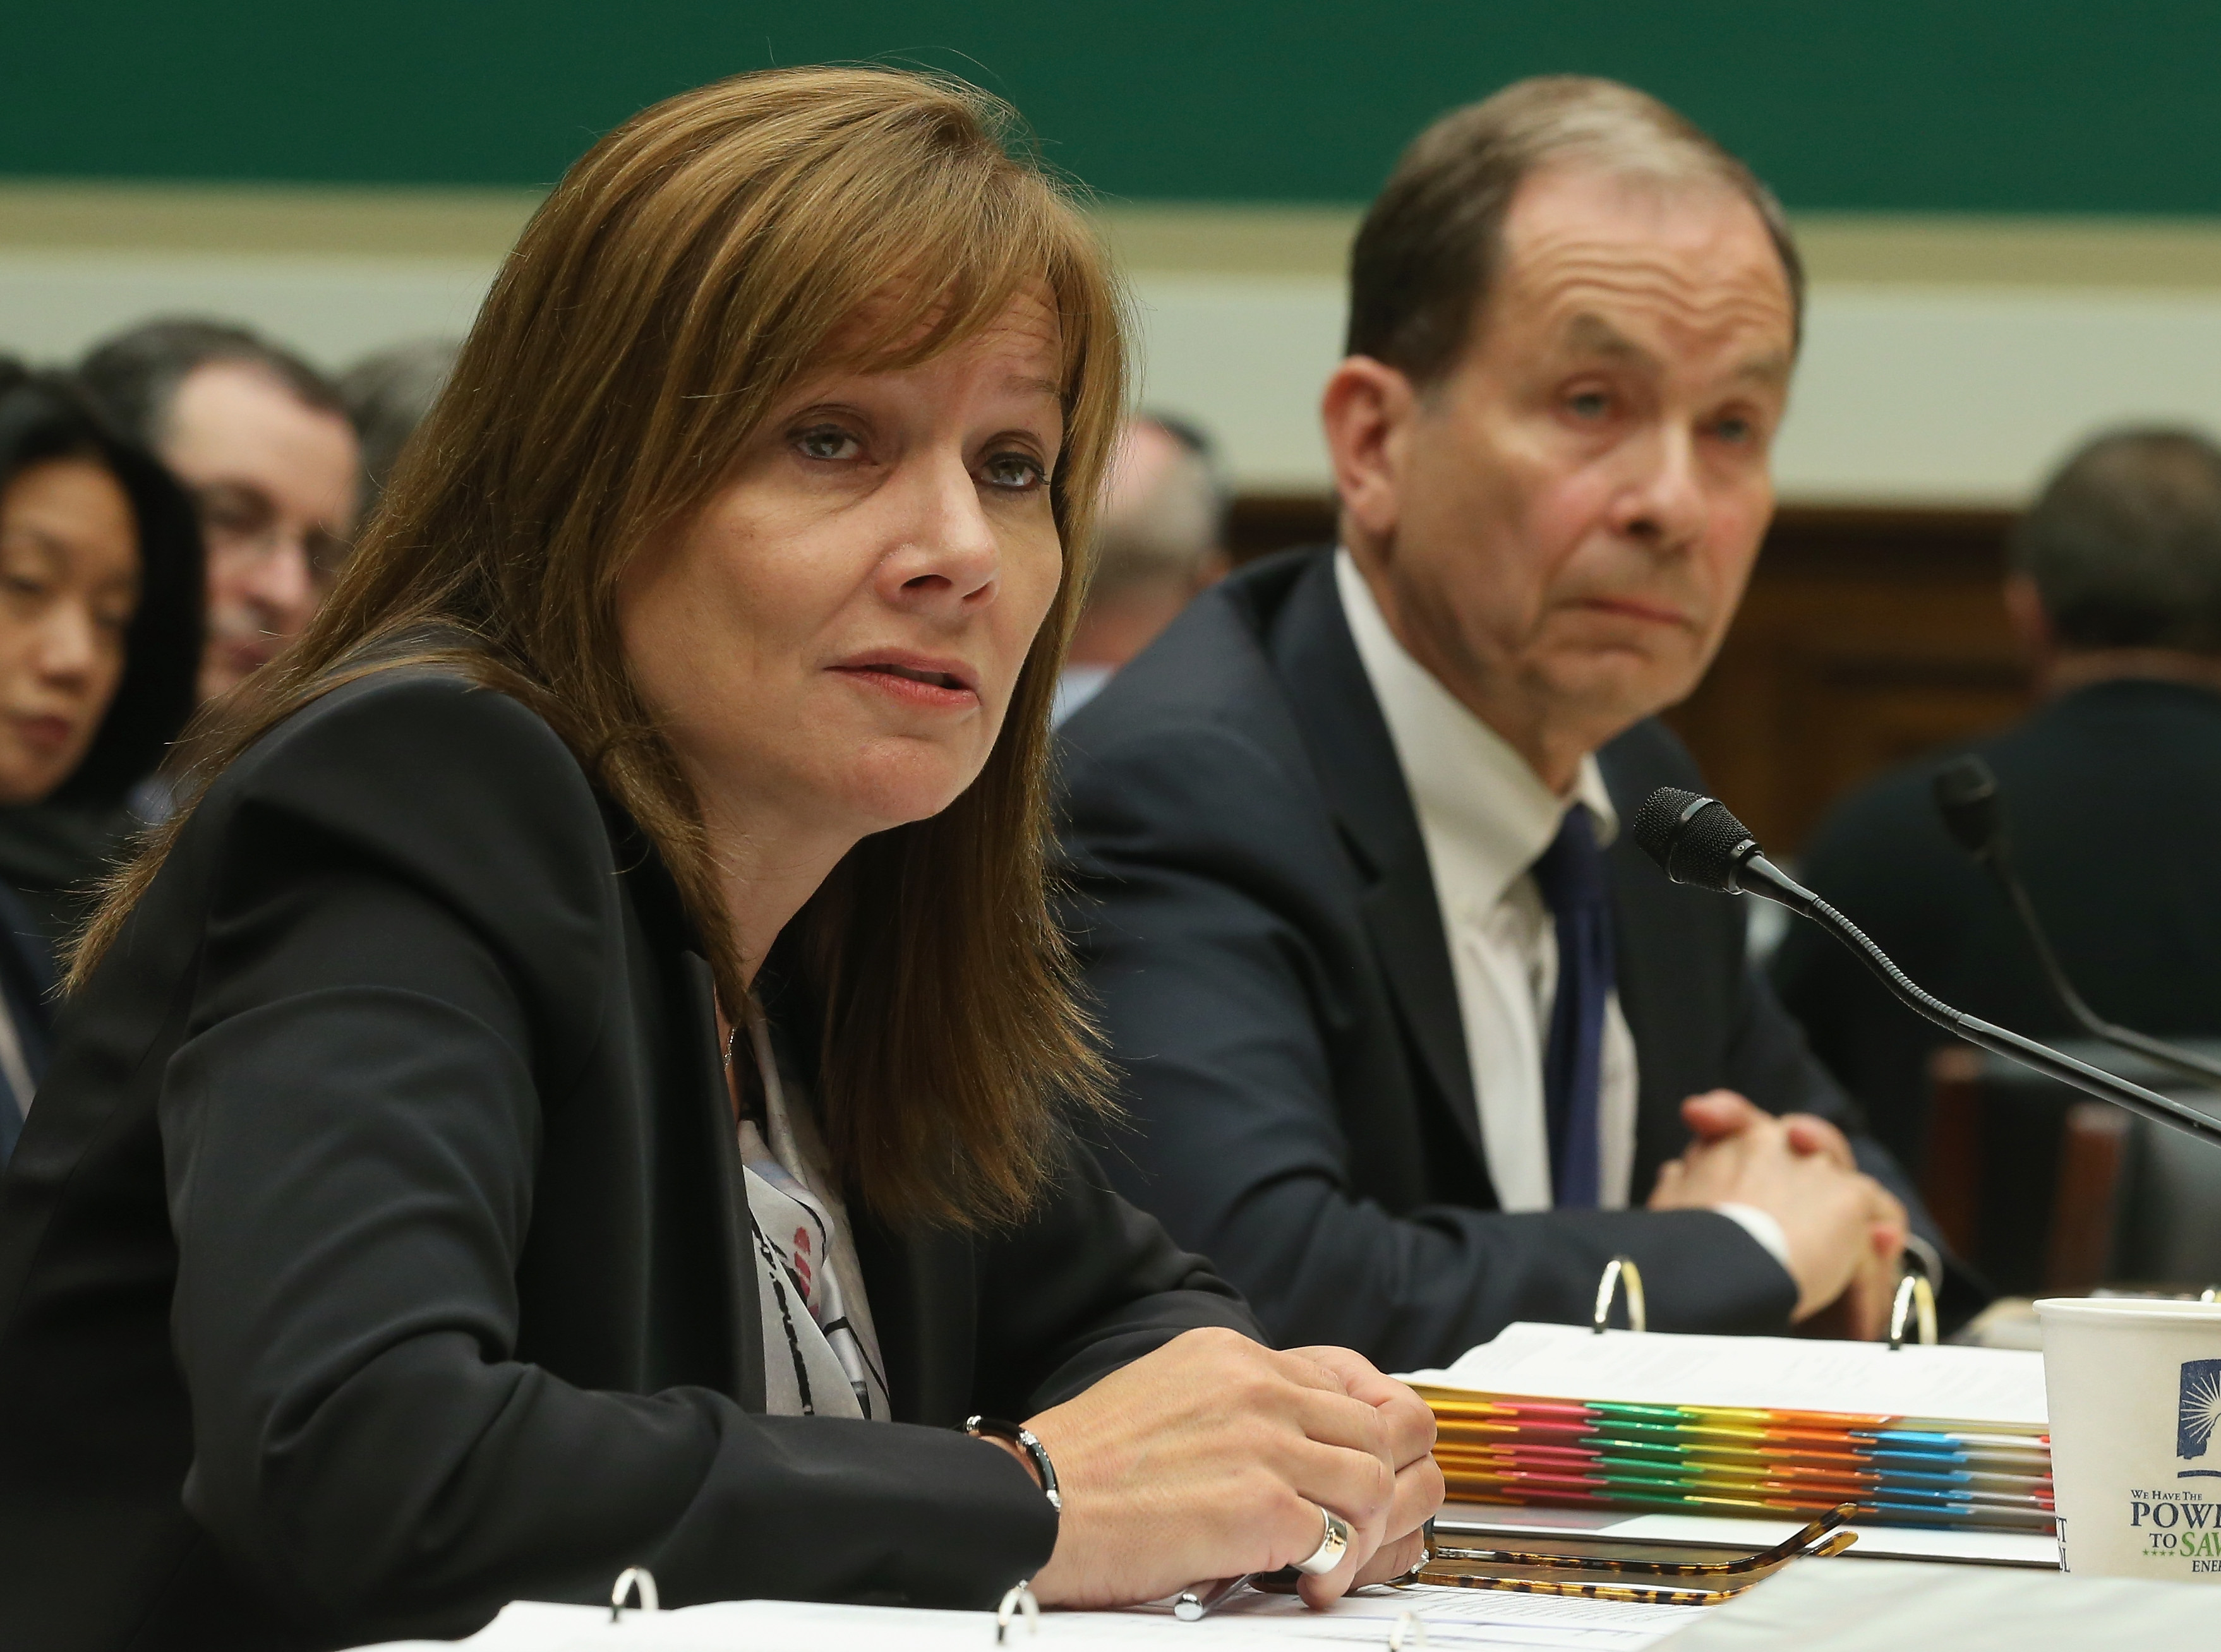 General Motors CEO Mary Barra (L), and Anton Valukas, head of GM's internal recall investigation, field questions while testifying during a House Energy and Commerce Committee hearing on Capitol Hill on June 18, 2014 in Washington, DC. (Mark Wilson—Getty Images)